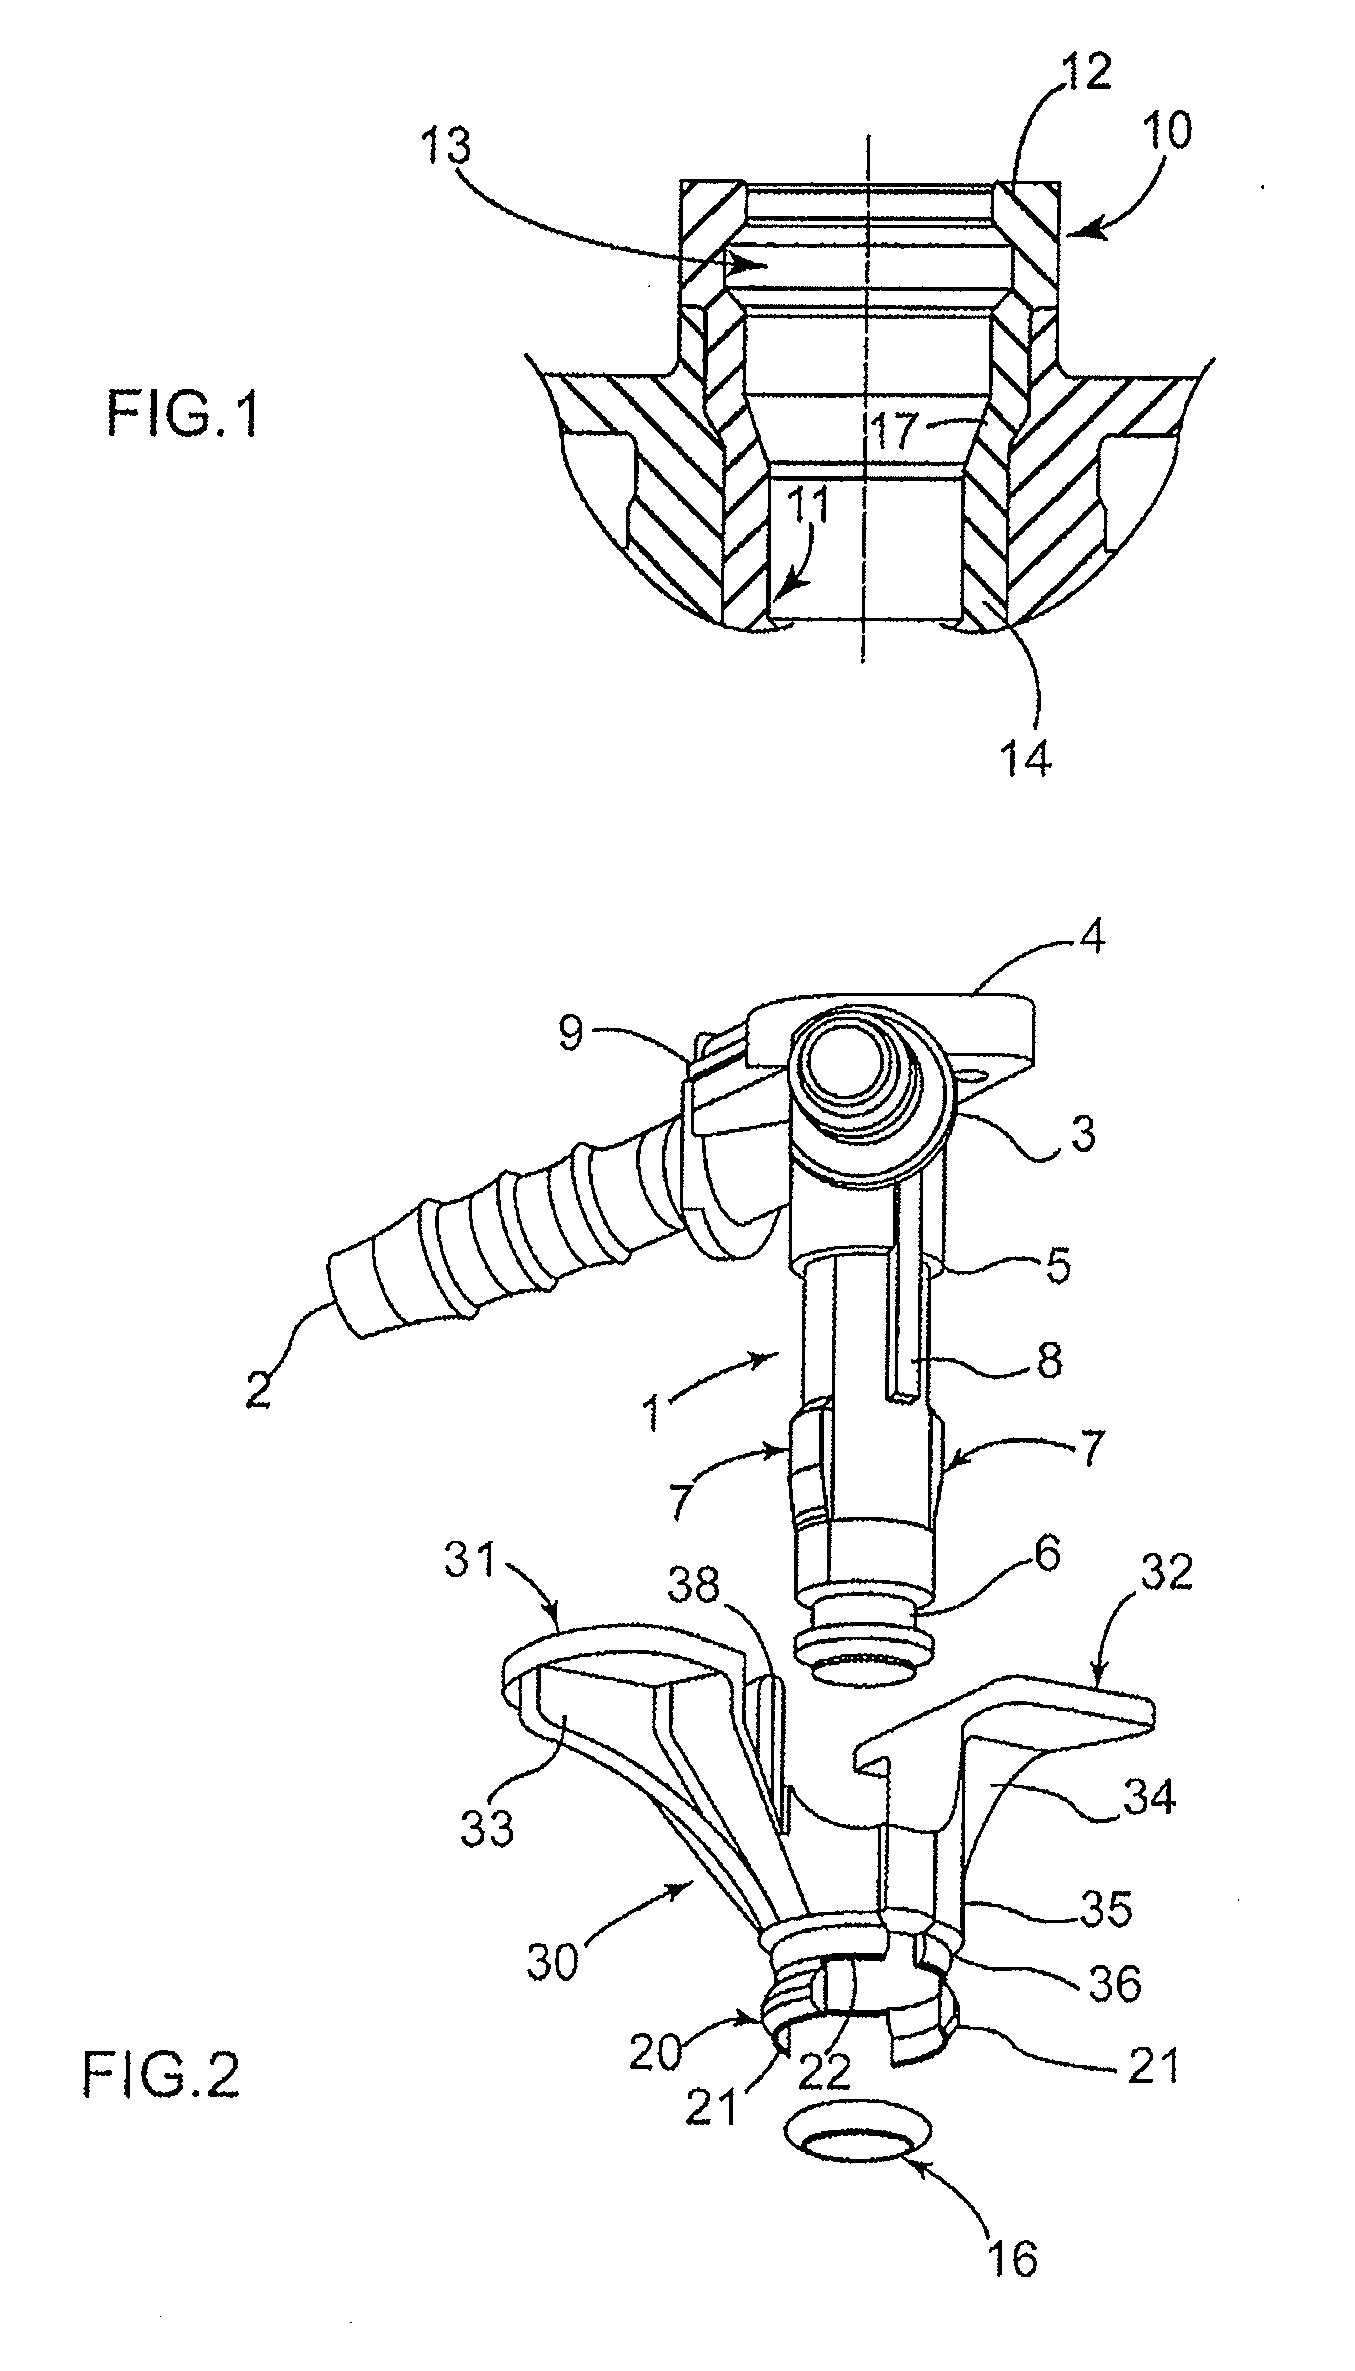 Coupling Device For Transferring Fluid, Circuit Incorporating and Fitting/Removing It